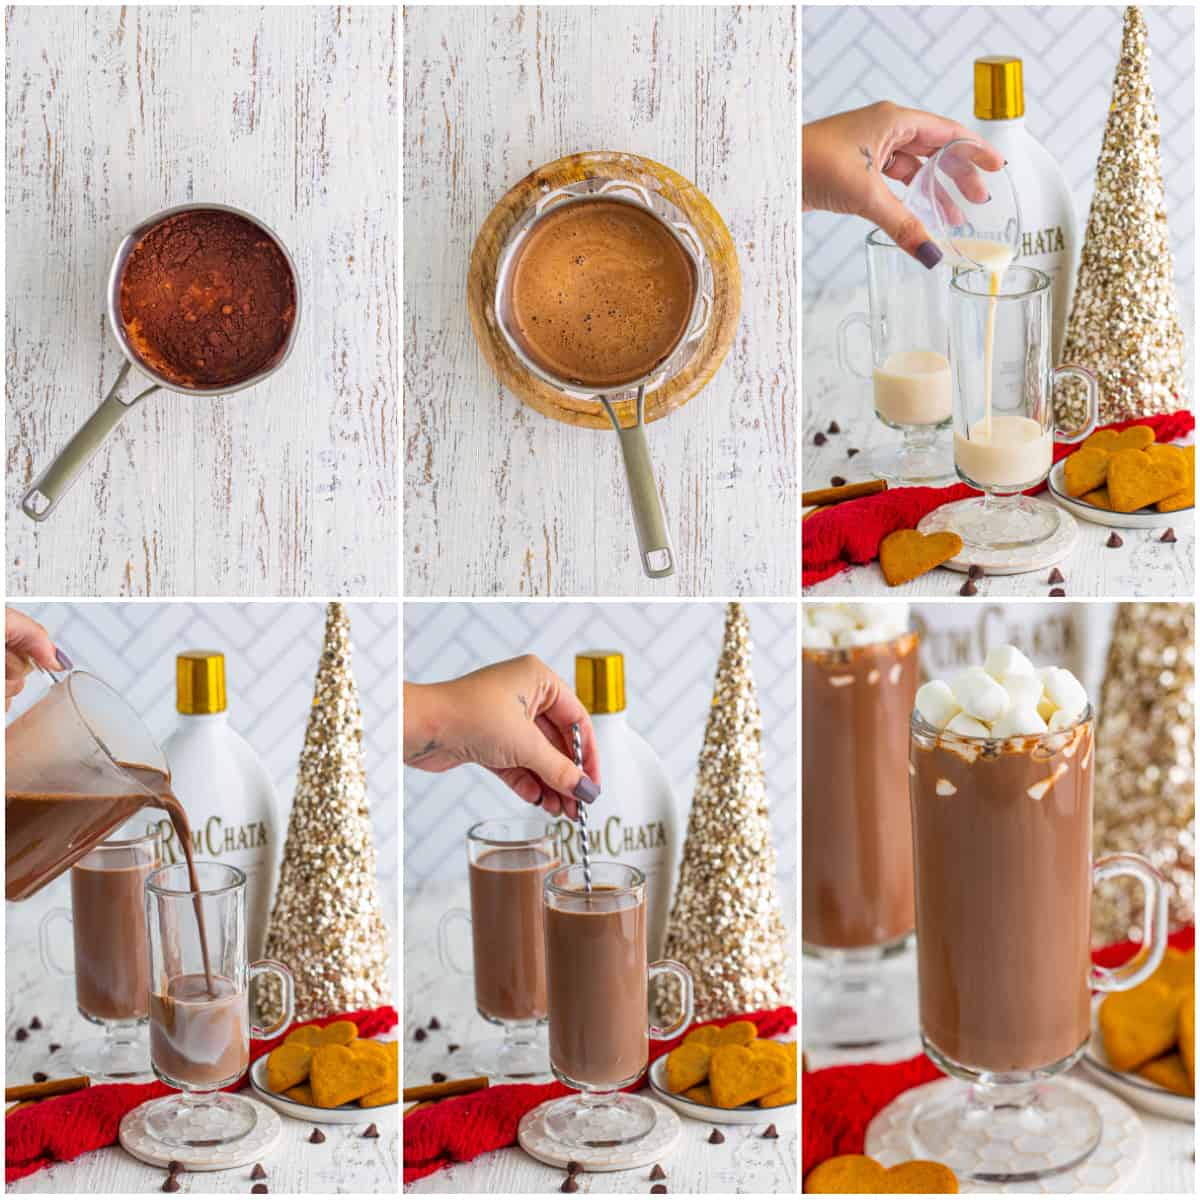 Step by step photos on how to make RumChata Hot Chocolate.